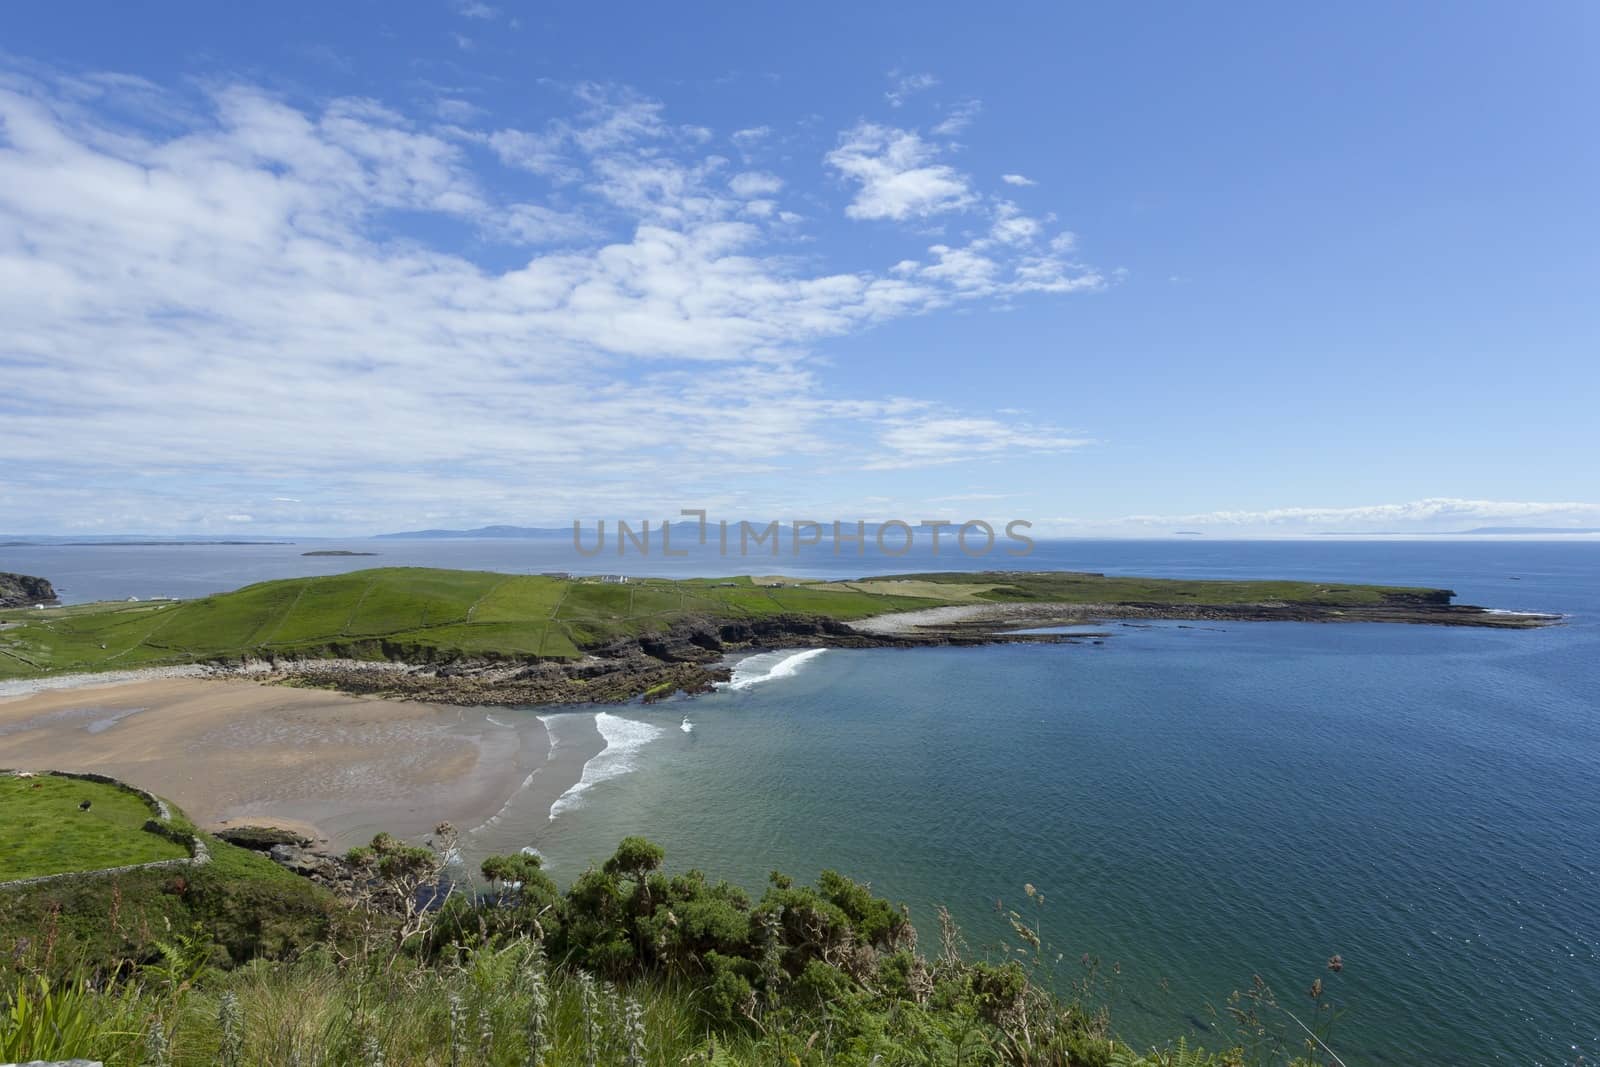 Scenic landscape photo of the Irish coastline in Muckross, Kilcar, Co. Donegal. View of Donegal bay with Benbulbin in the distance